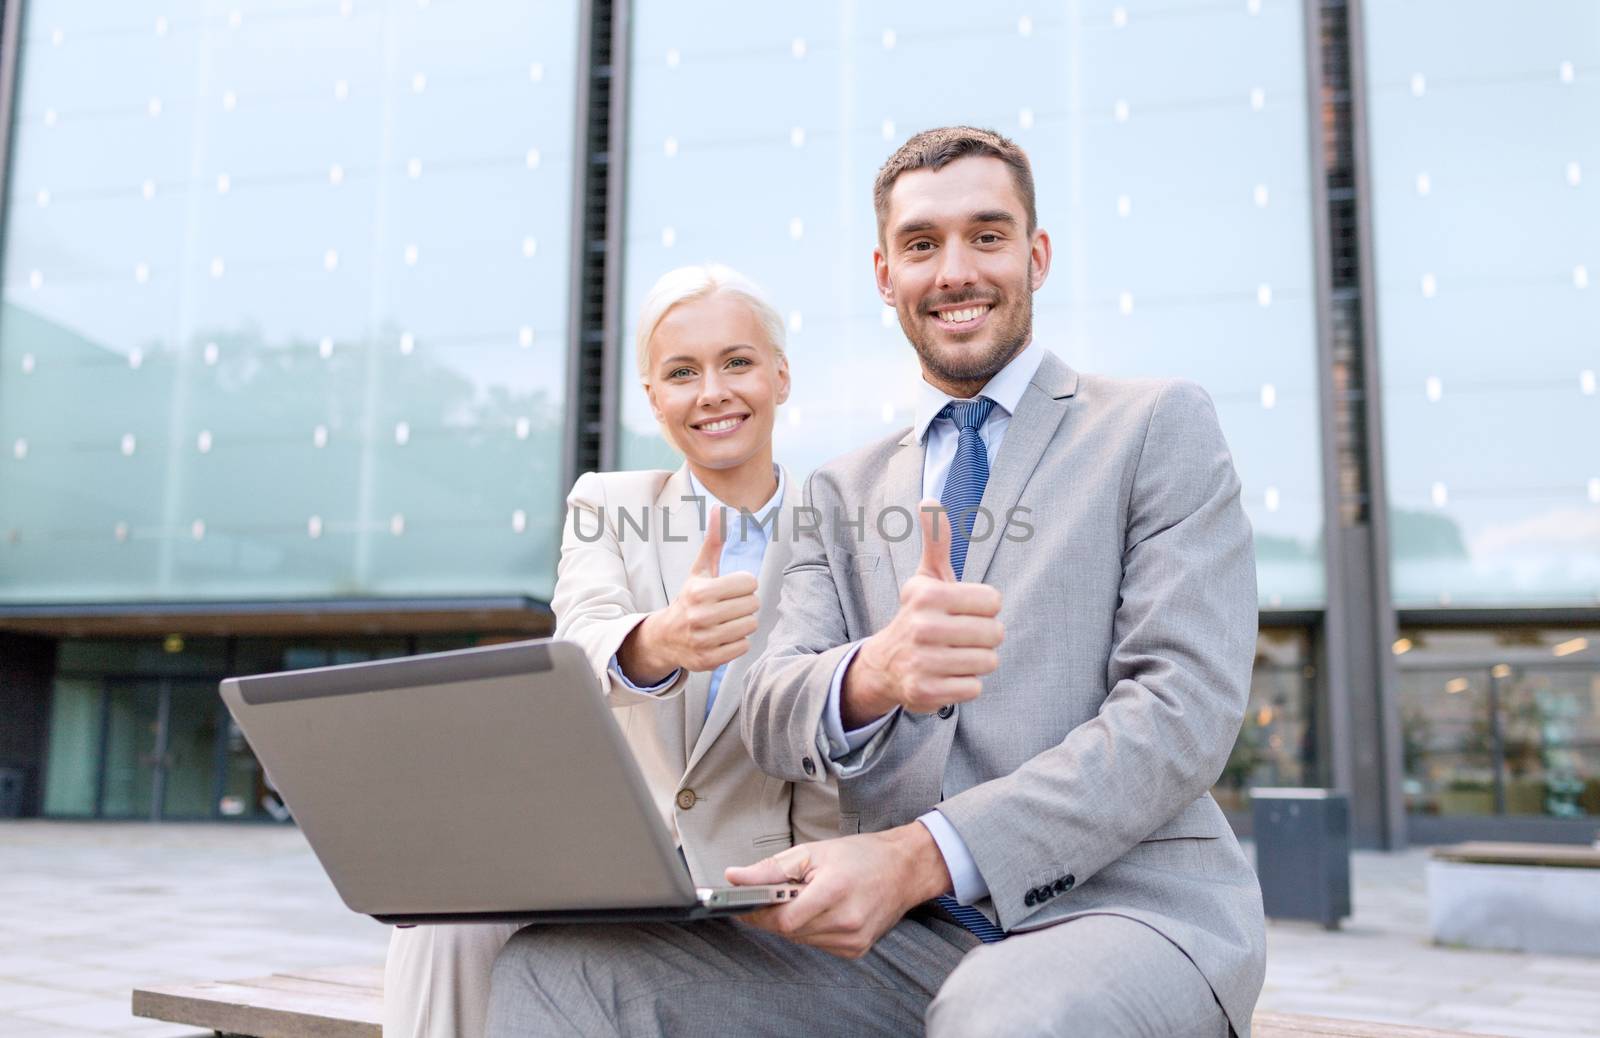 business, education, technology, gesture and people concept - smiling businesspeople working with laptop computer showing thumbs up on city street